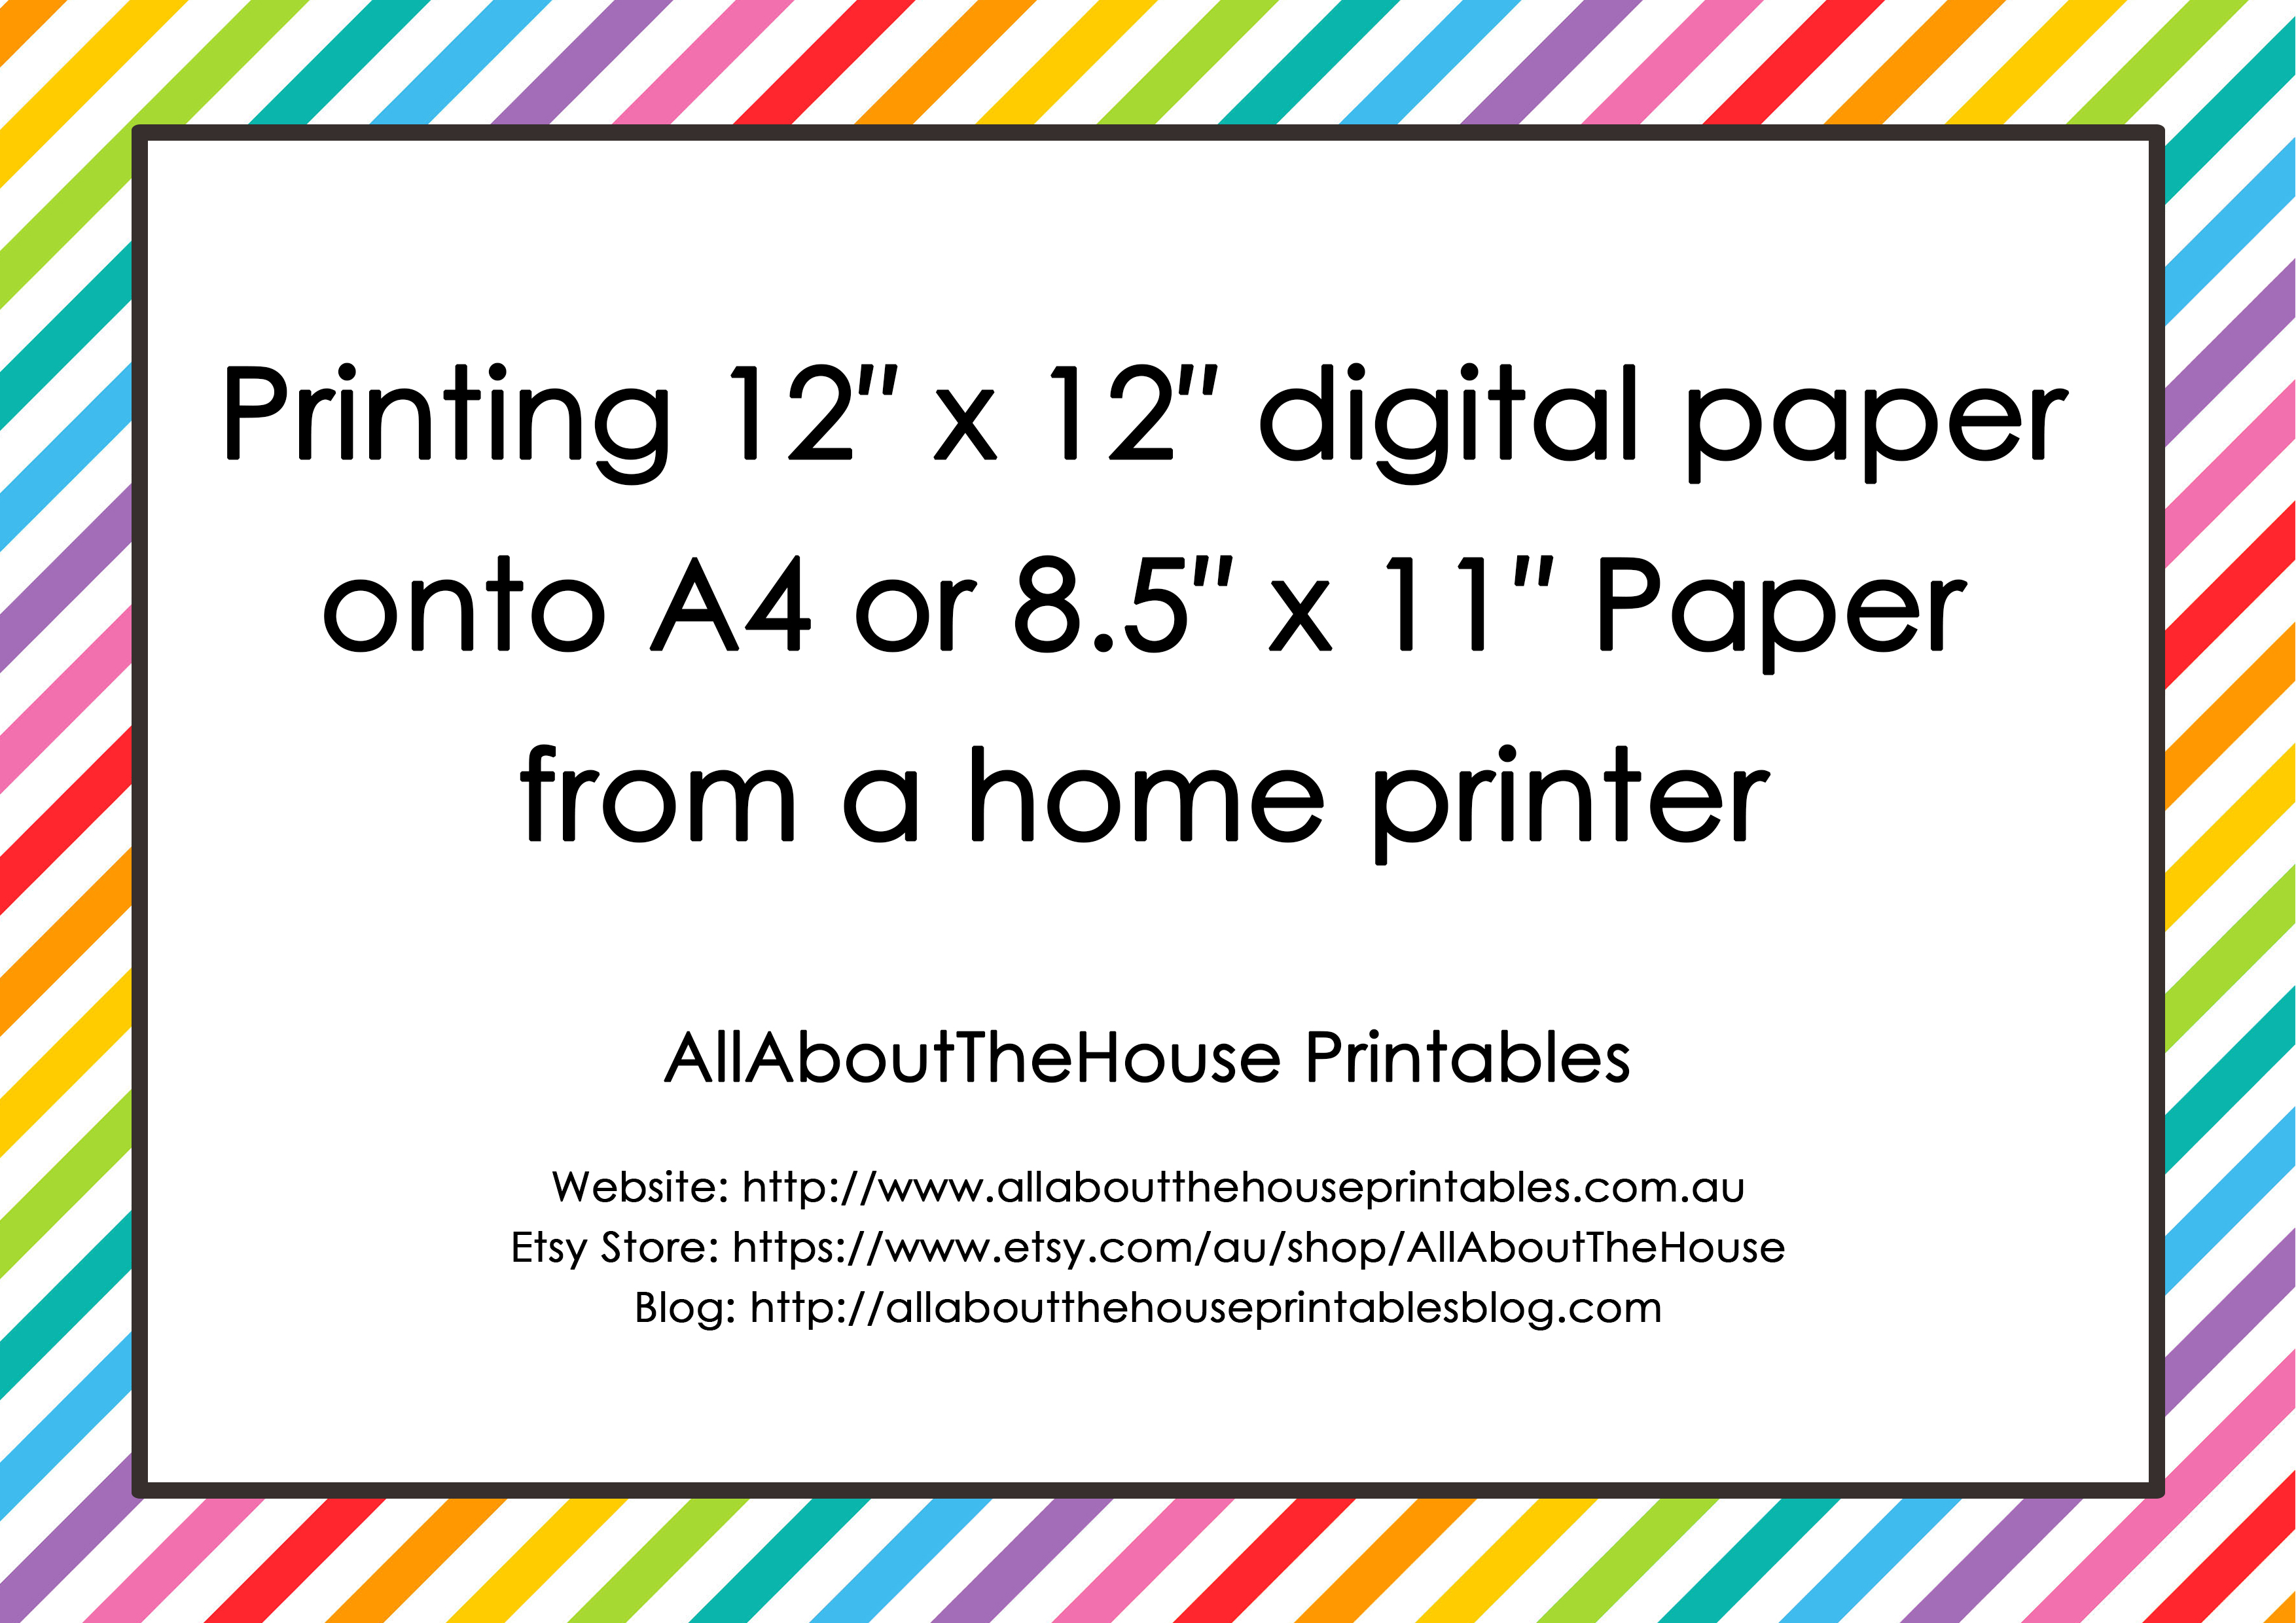 Printing 12″ x 12″ digital paper onto A4 or letter size paper from a home printer